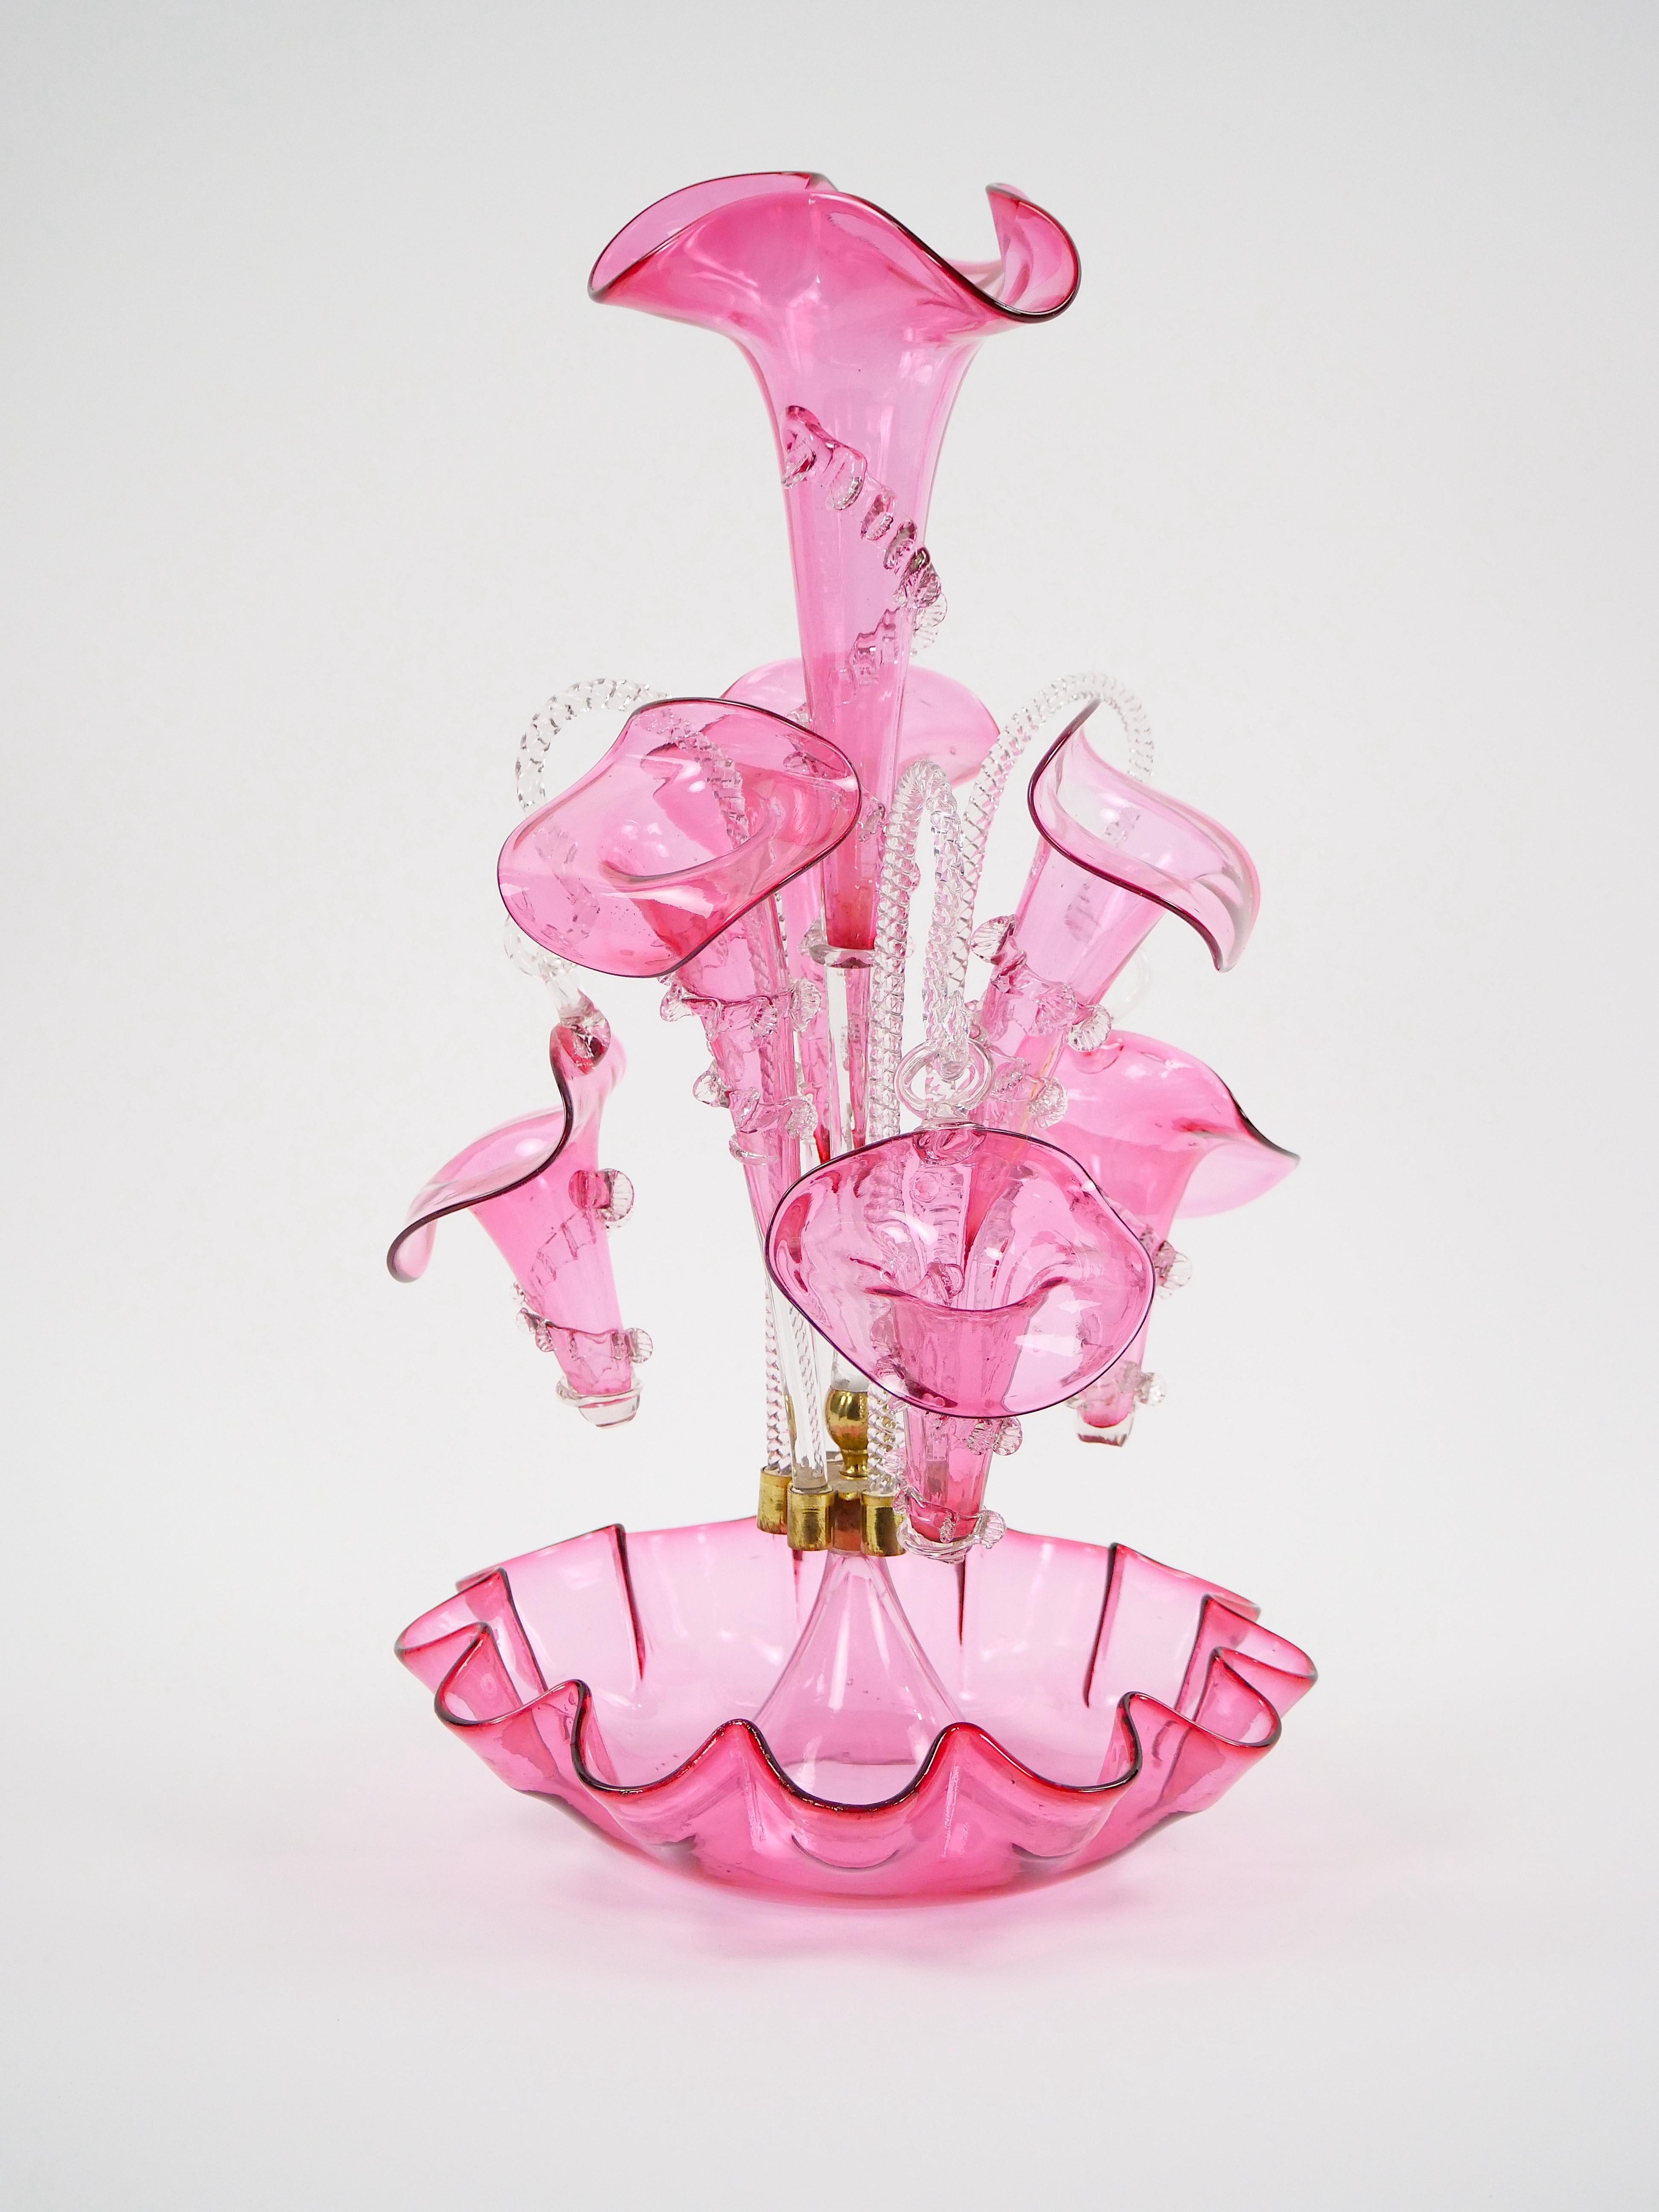 Enhance your living space  with this exquisite 19th Century Victorian-style French Glass  Epergne Centerpiece Vase in a captivating pink hue. A true masterpiece of craftsmanship and elegance, this vase is sure to become the focal point of any room.